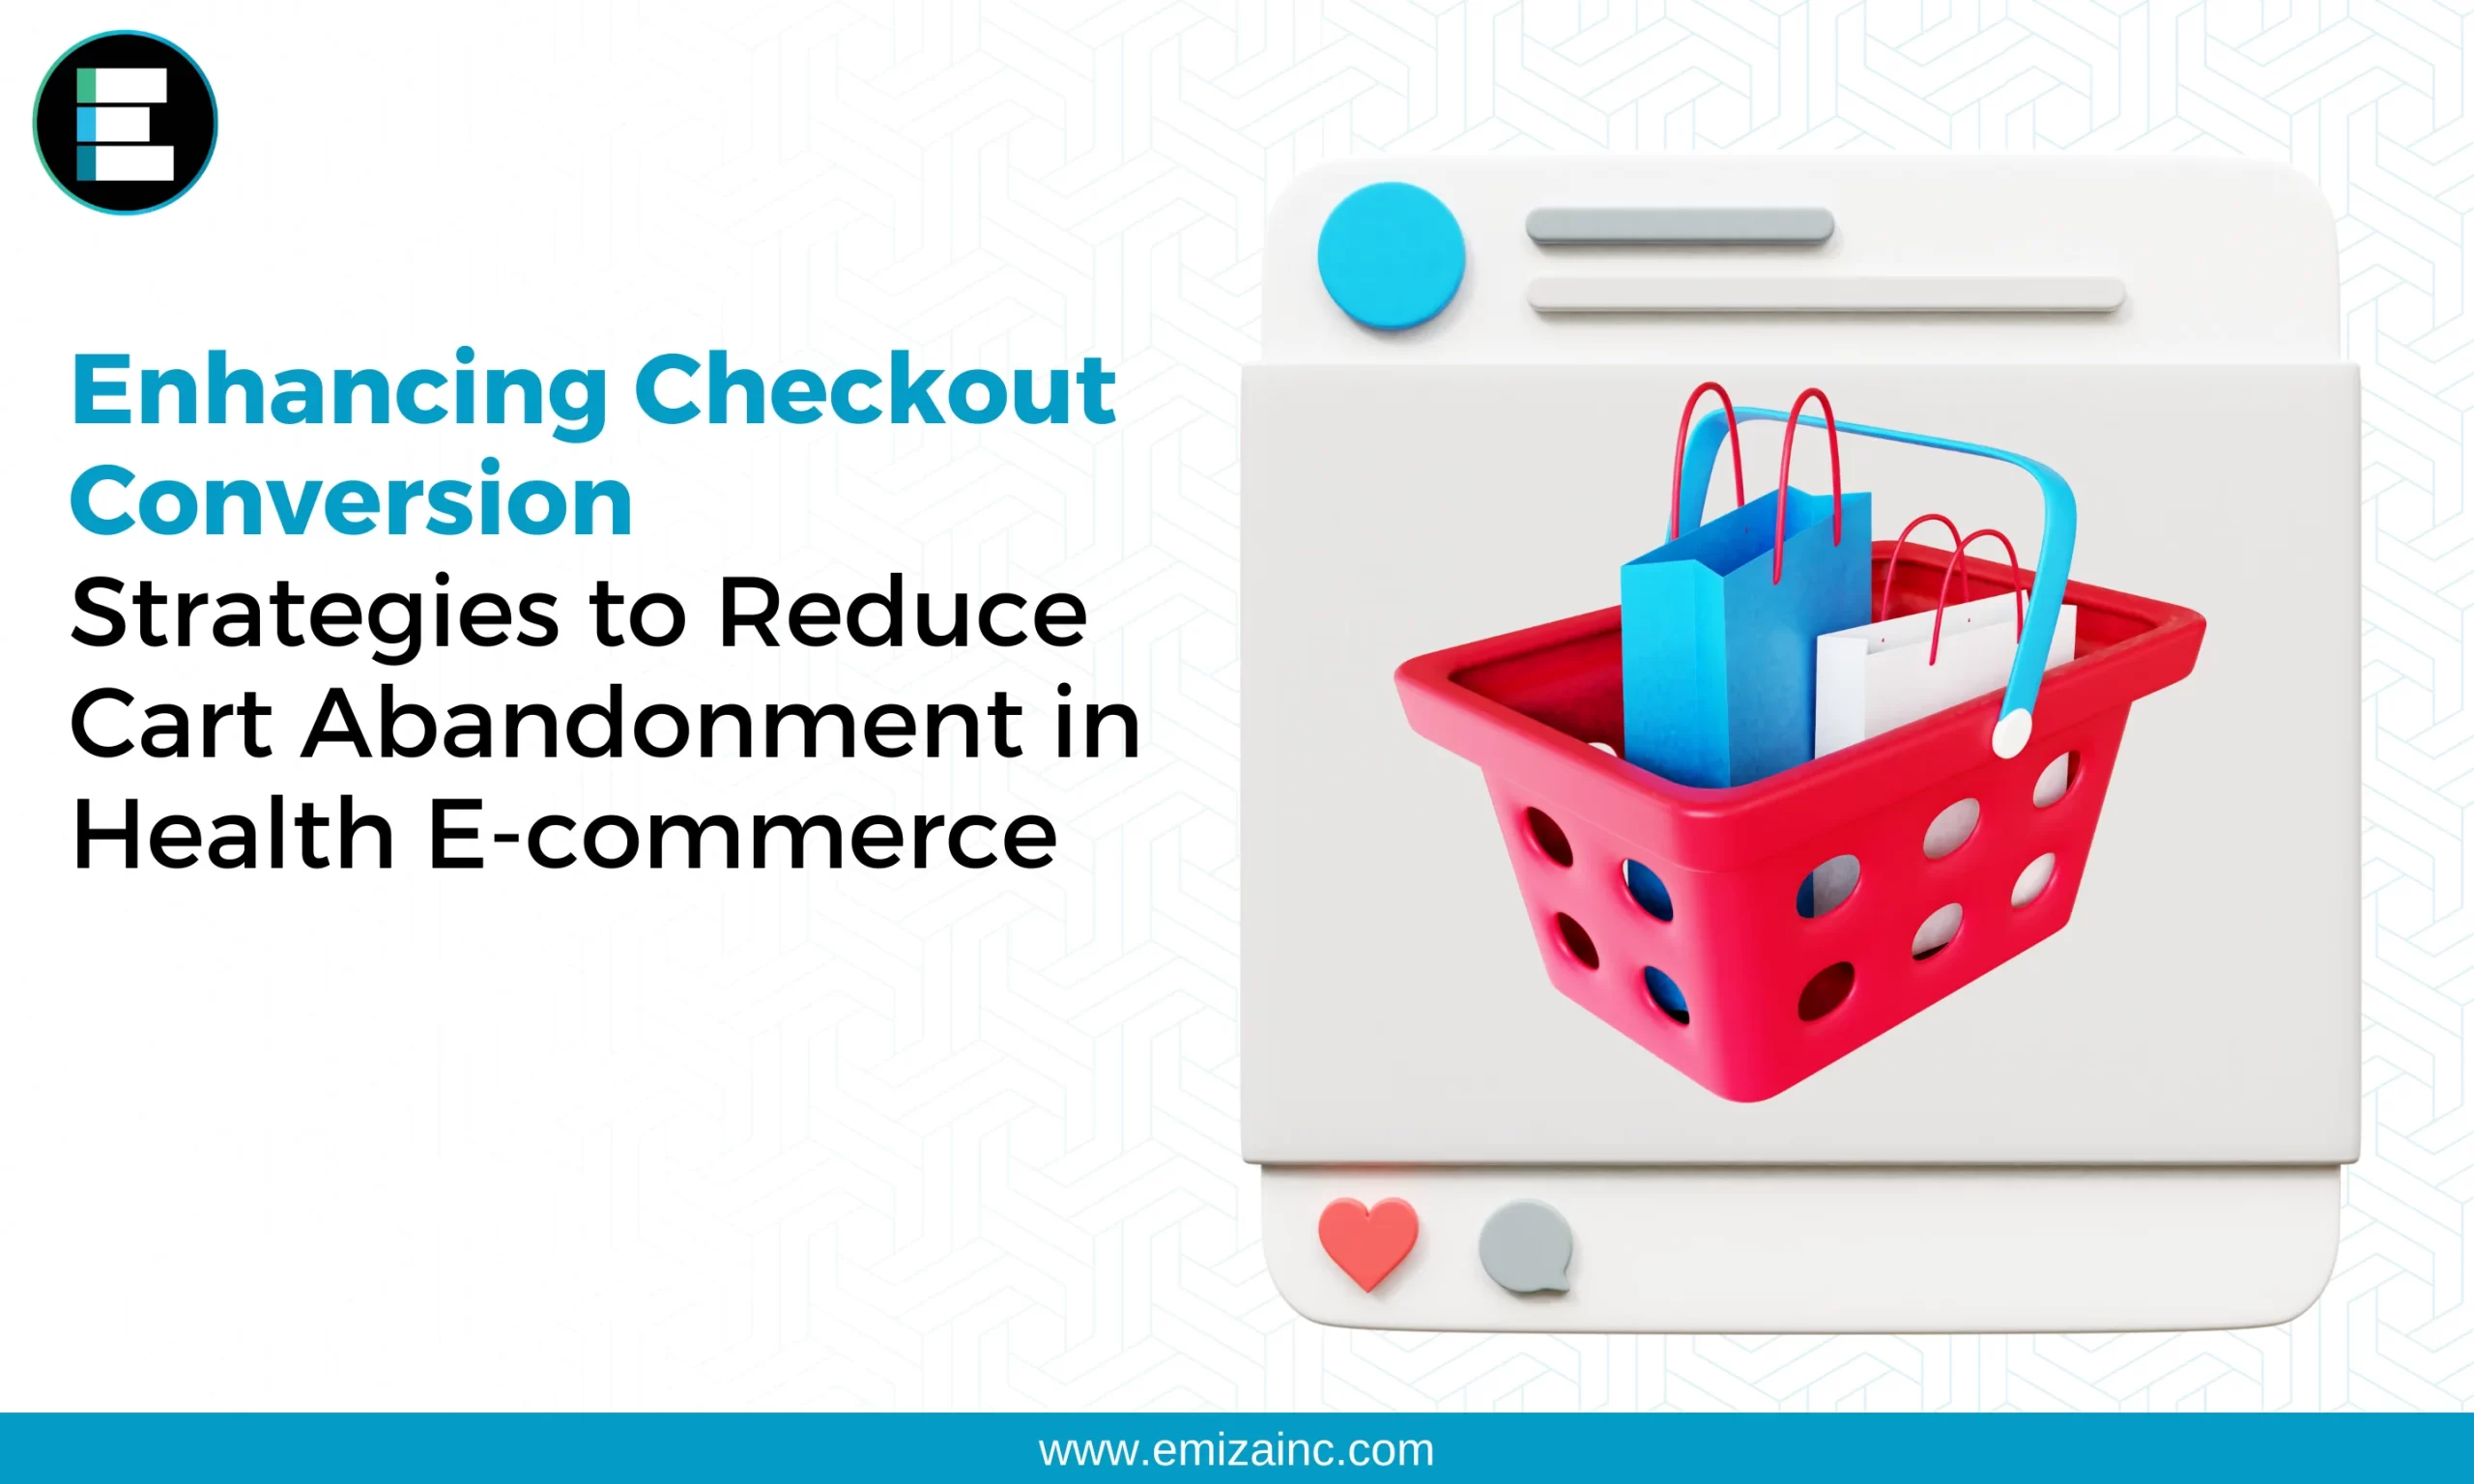 Enhancing Checkout Conversion: Strategies to Reduce Cart Abandonment in Health E-commerce